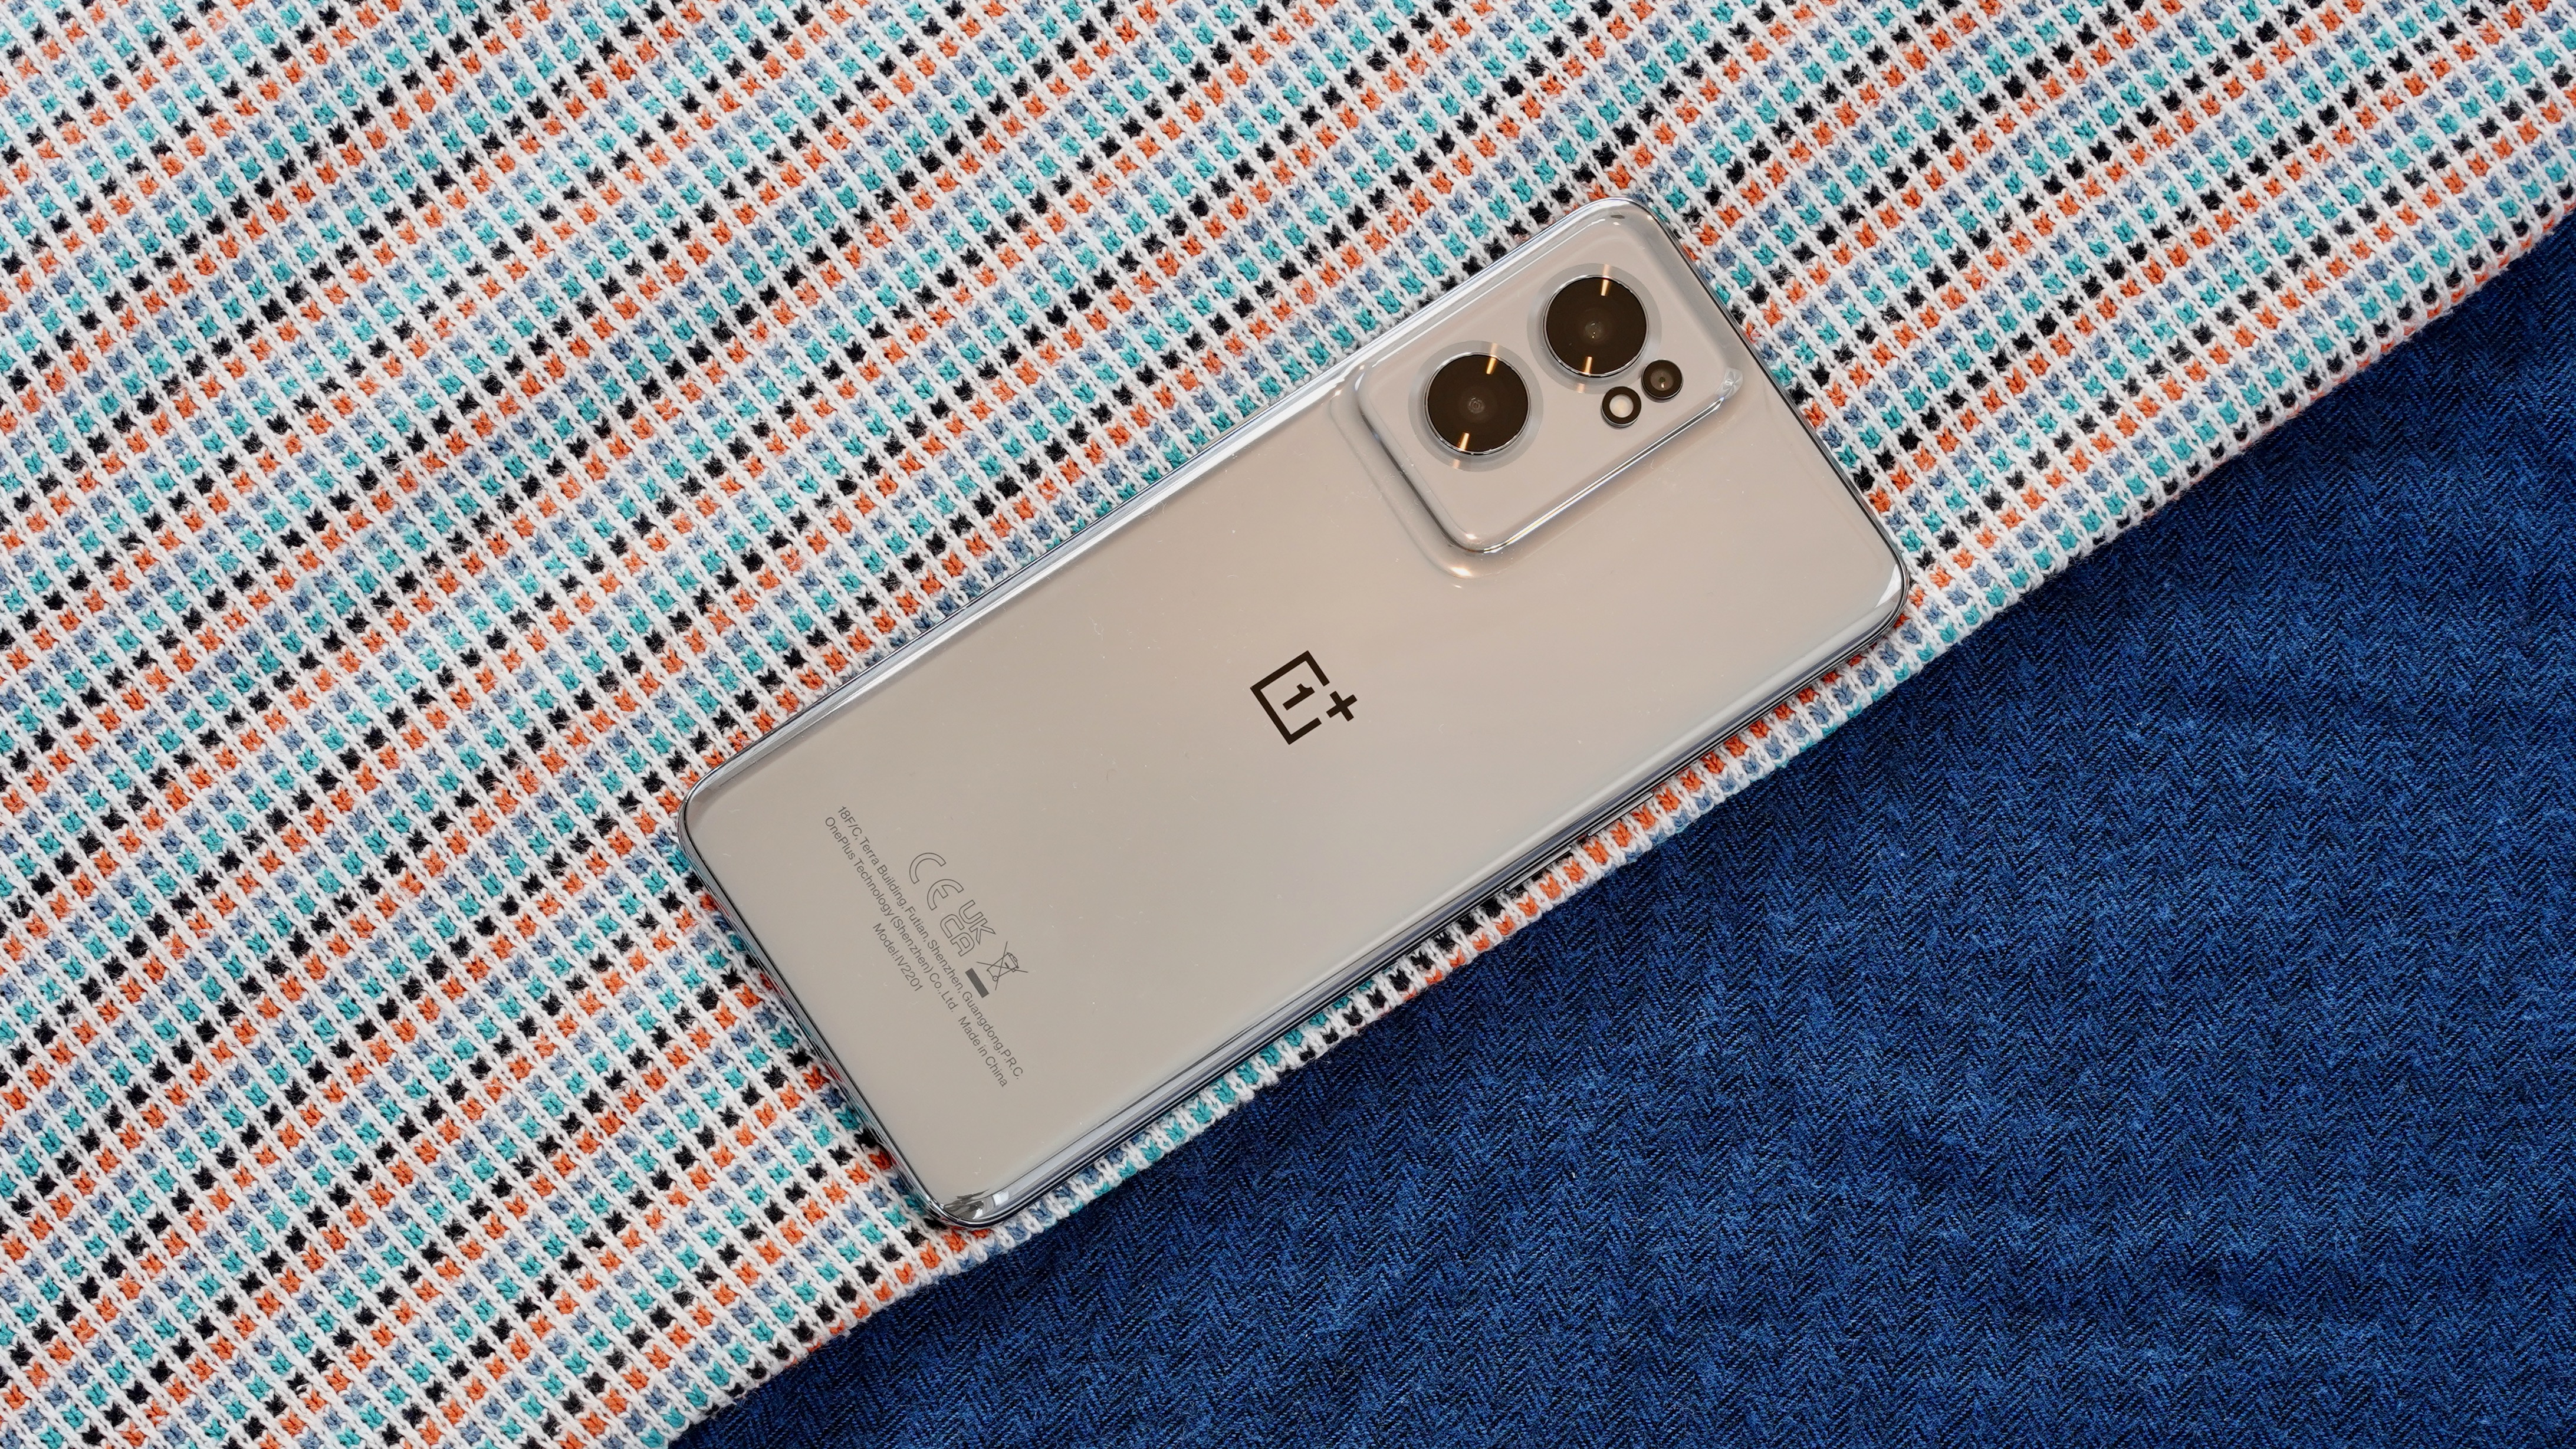 OnePlus Nord 2 vs. Nord CE vs. OnePlus 9: Which has the best